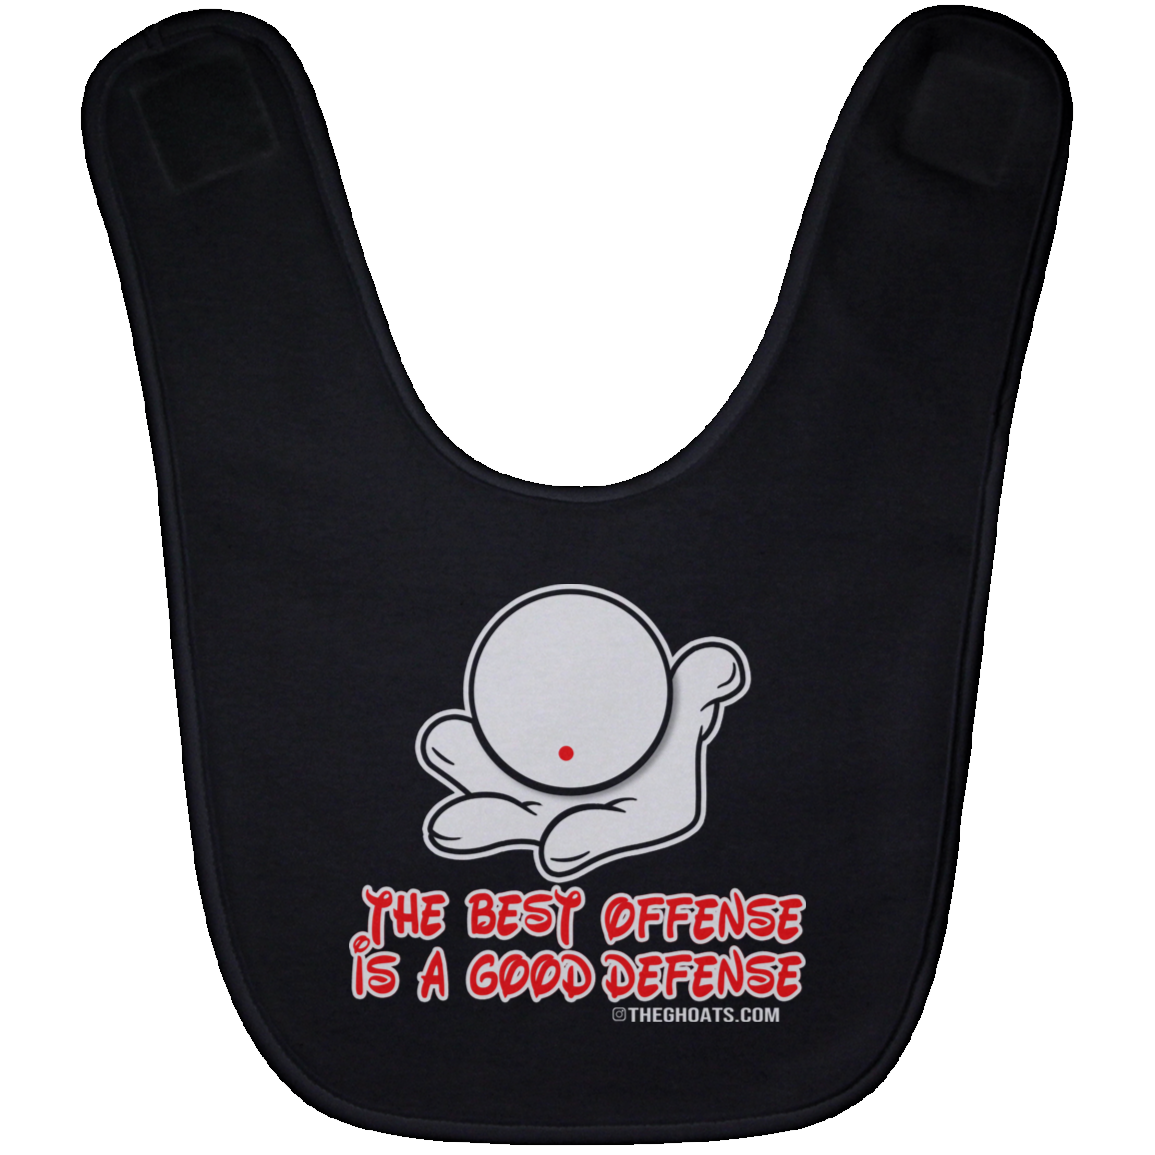 The GHOATS Custom Design. #5 The Best Offense is a Good Defense. Baby Bib